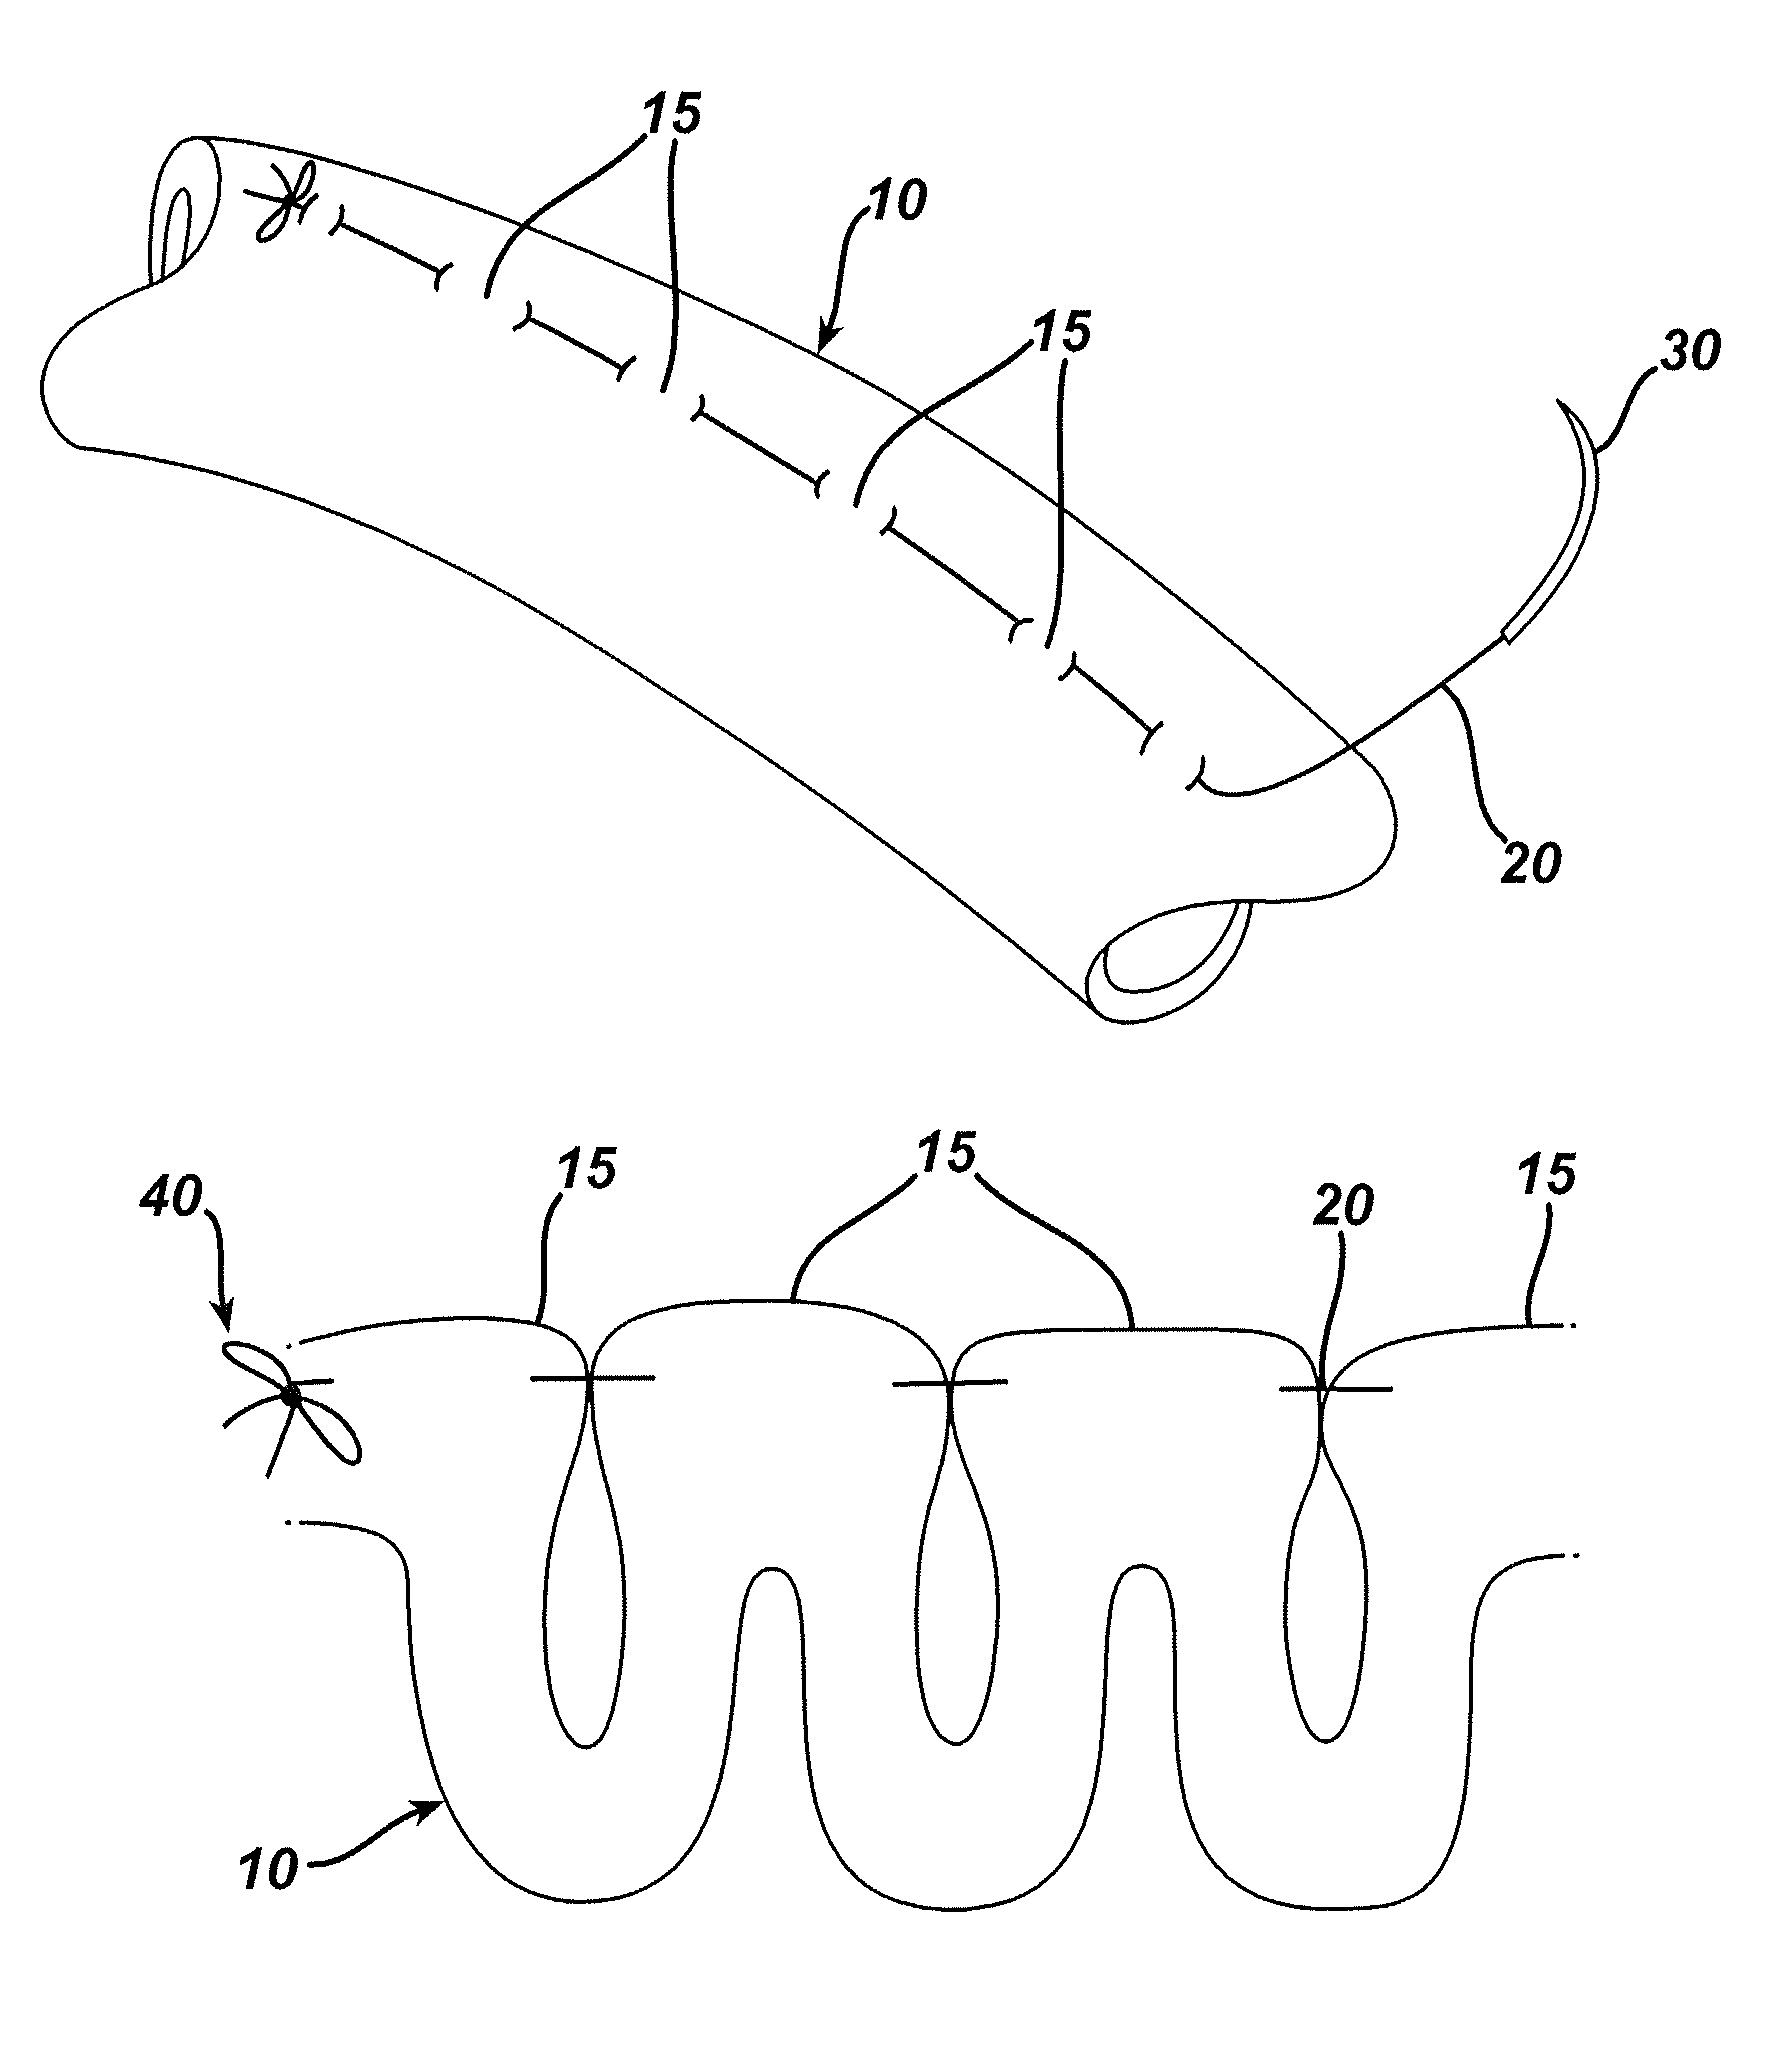 Methods and devices for the rerouting of chyme to induce intestinal brake